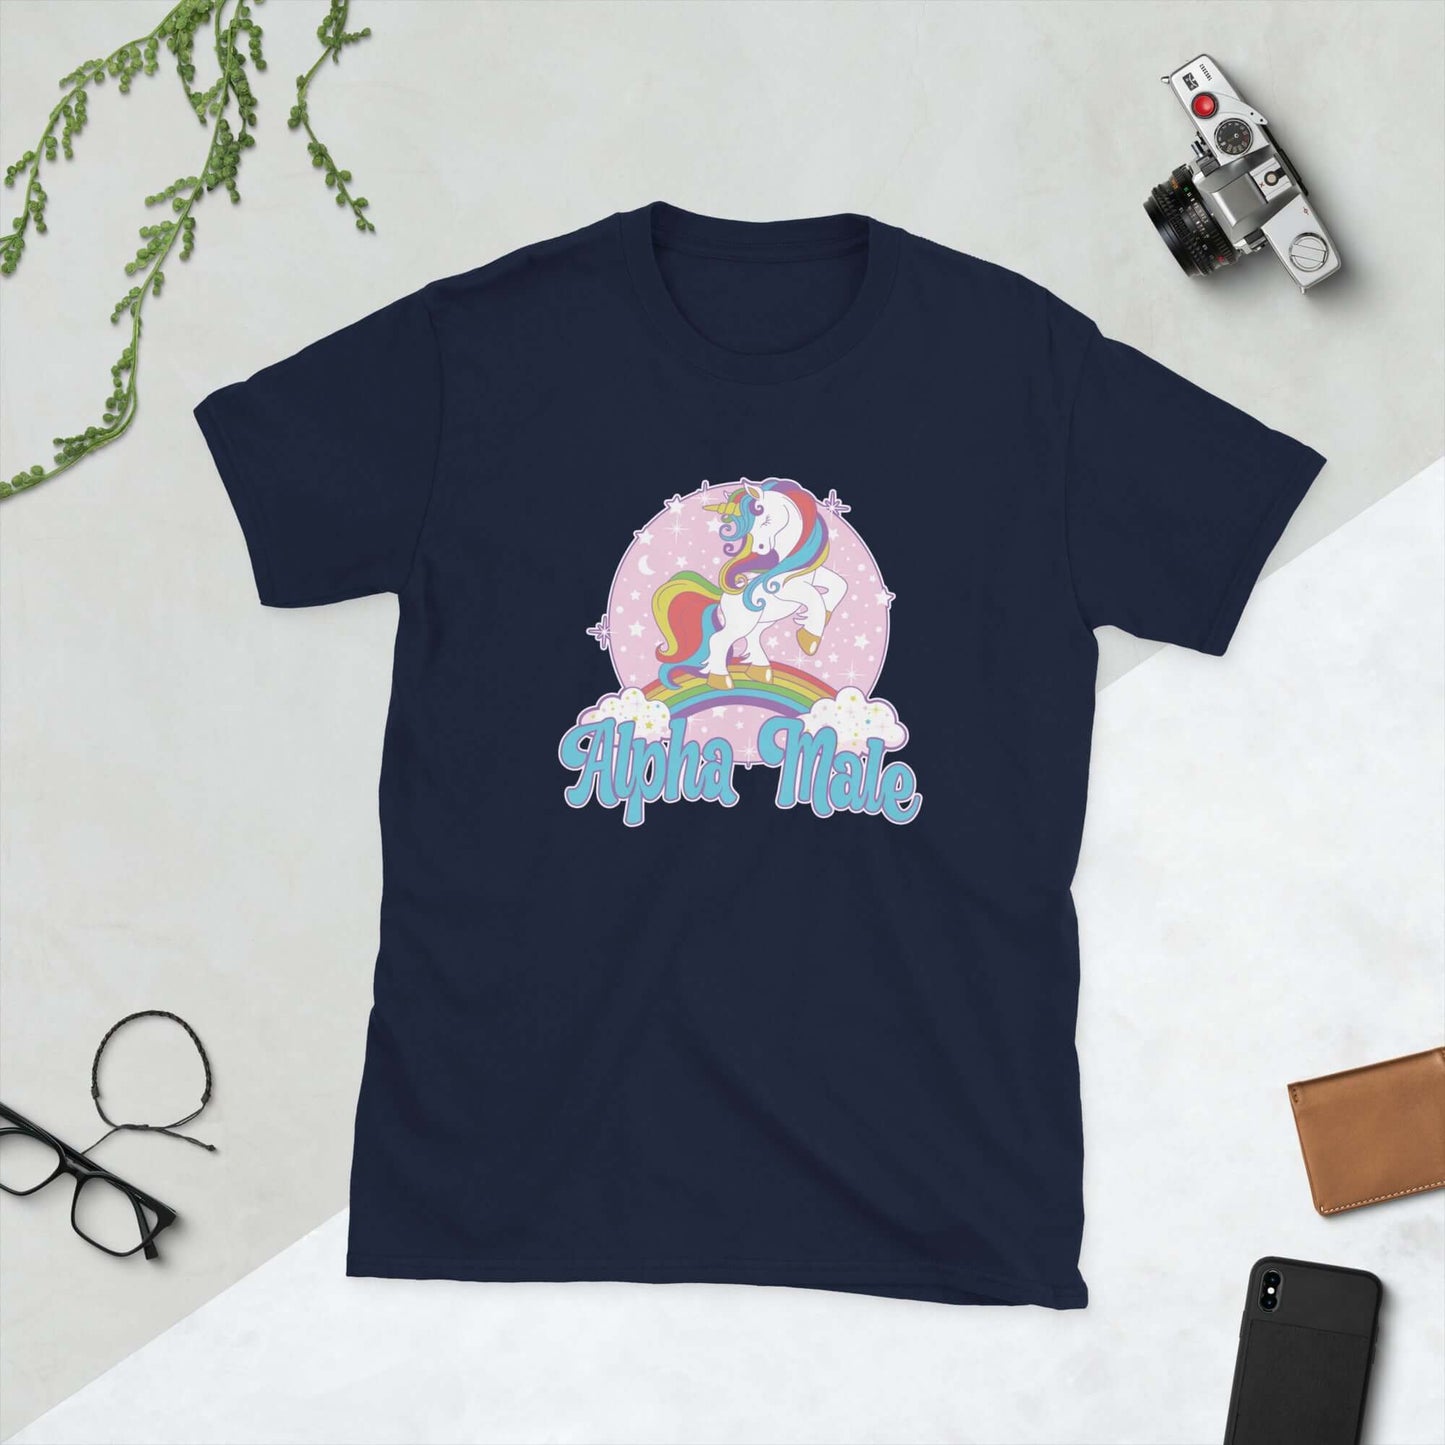 navy t-tshirt that says Alpha Male with unicorn graphics